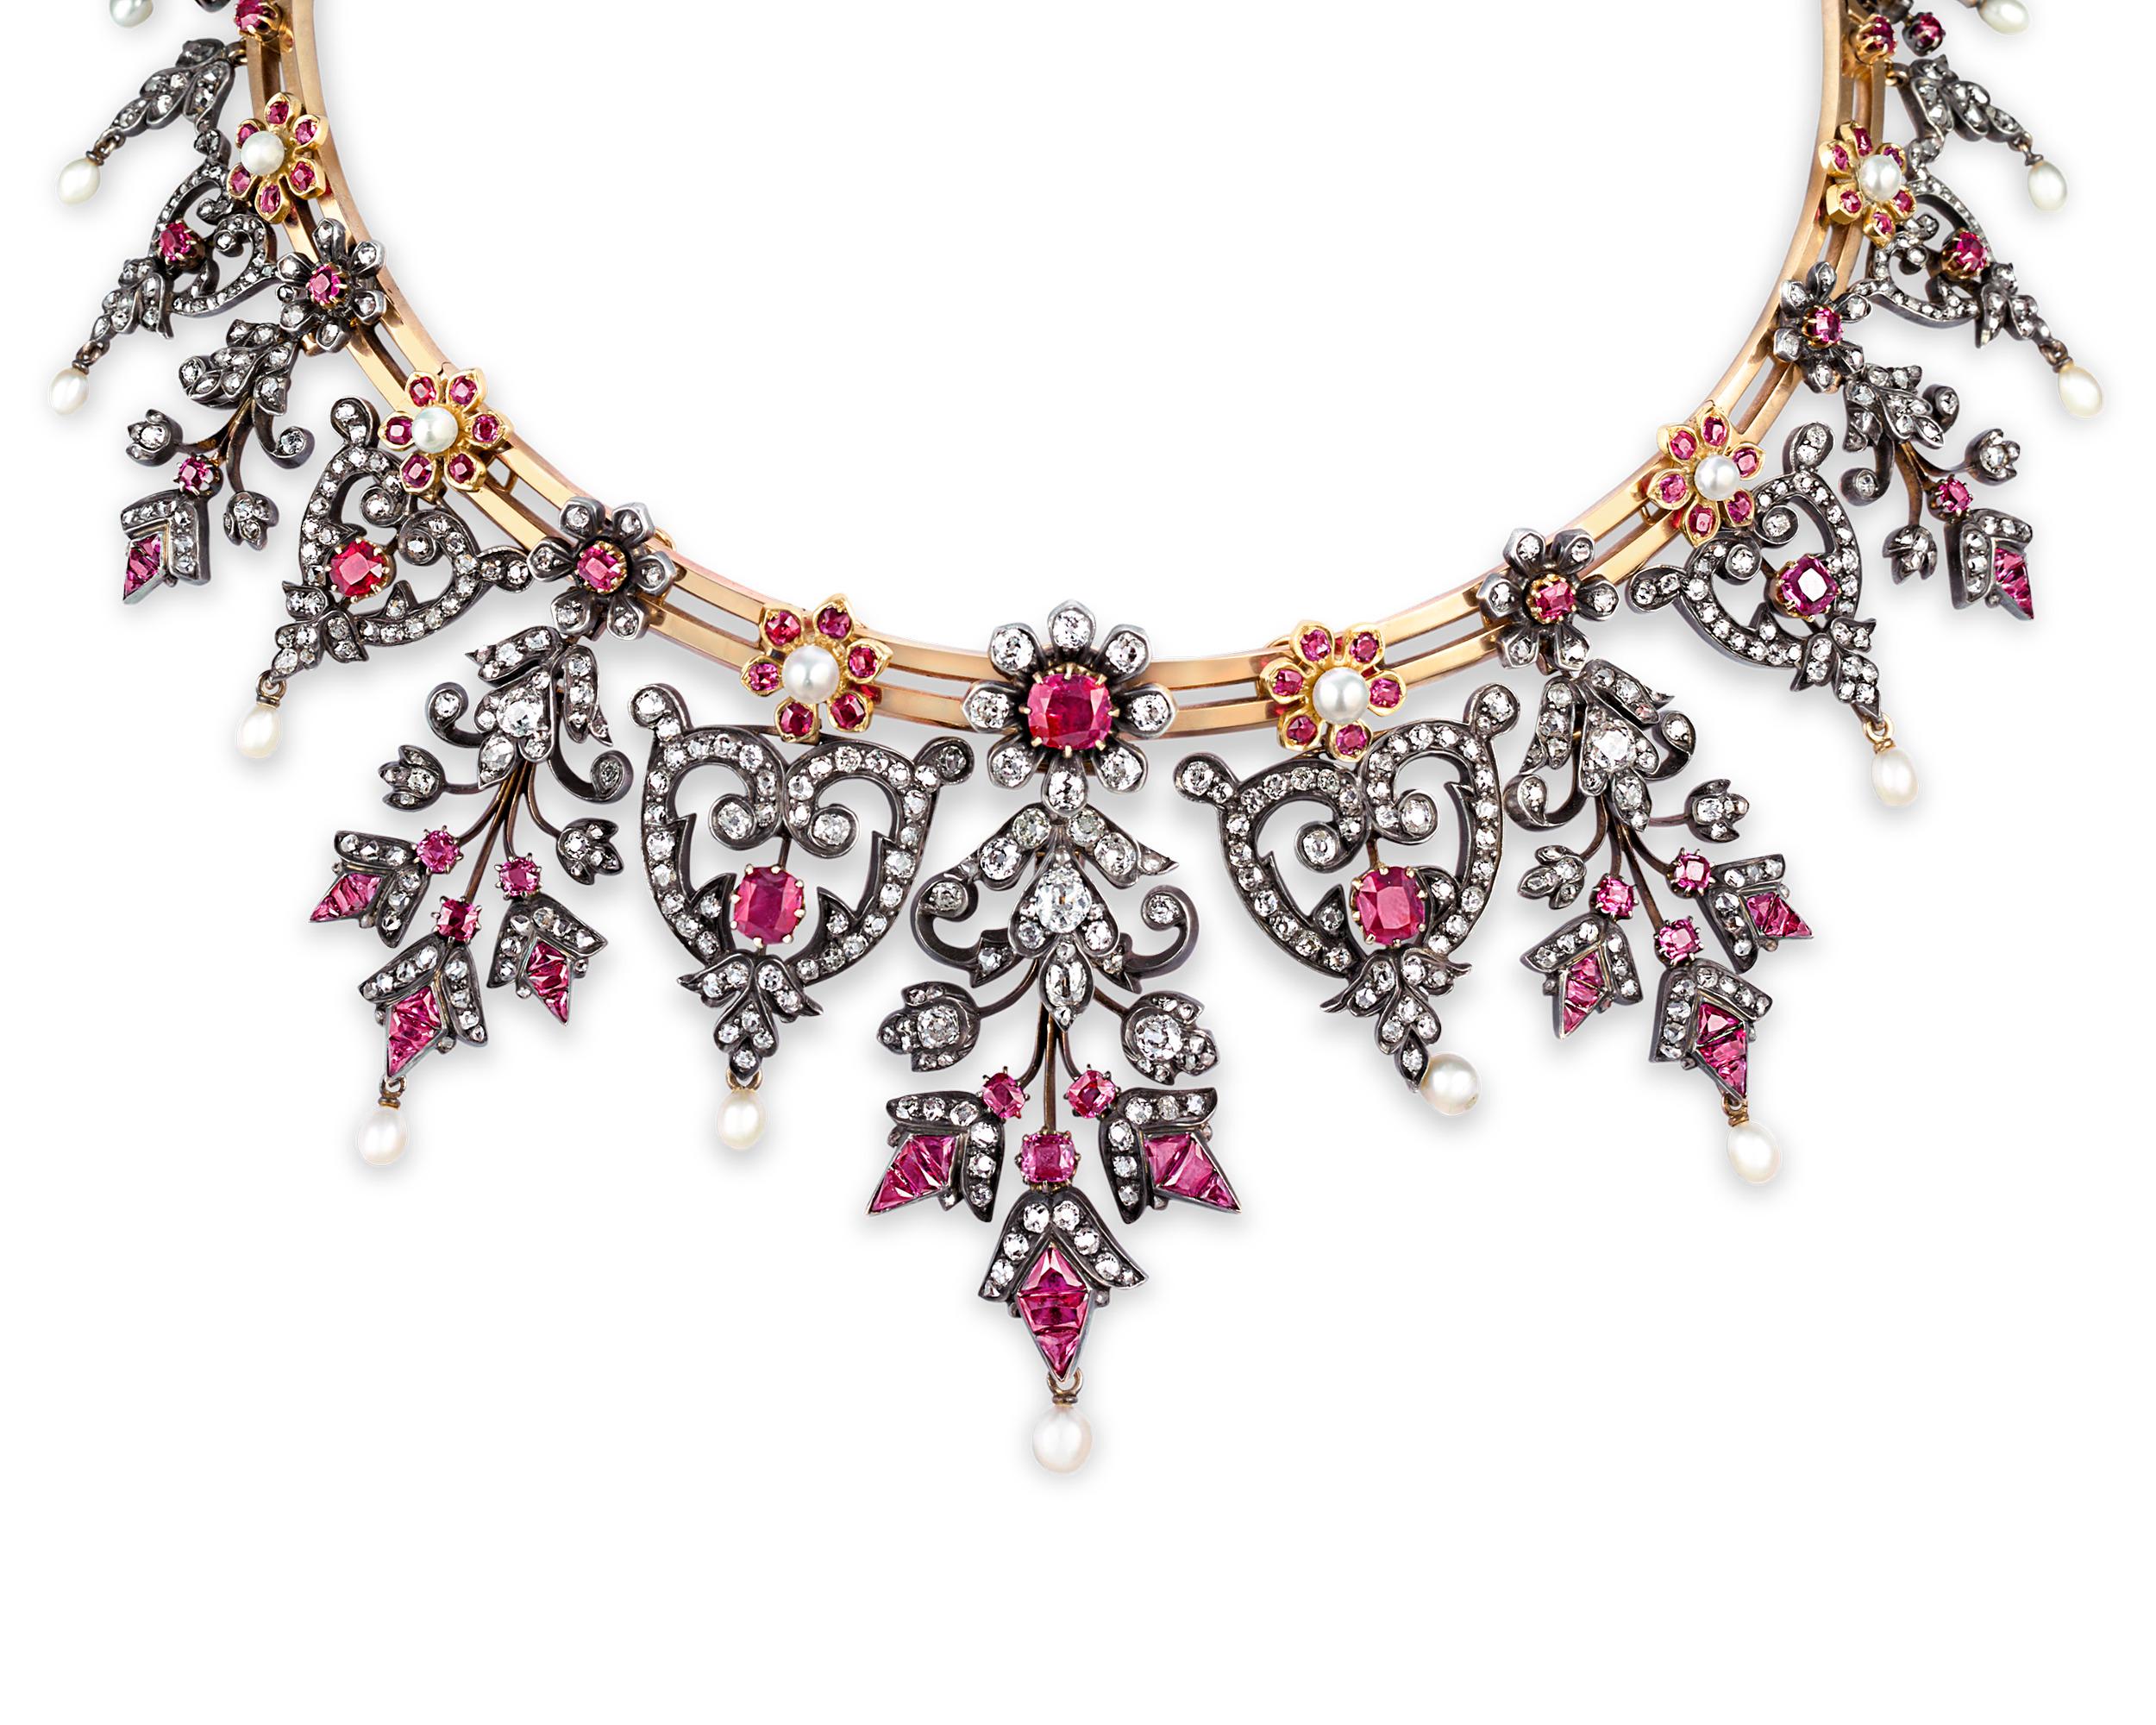 Dramatic red rubies evoke pure drama in this magnificent necklace that hails from the French Crown Jewels, one of the most extravagant collections of royal jewels to ever exist. Crafted of fine calibré-cut Burma rubies, mine-cut diamonds and natural